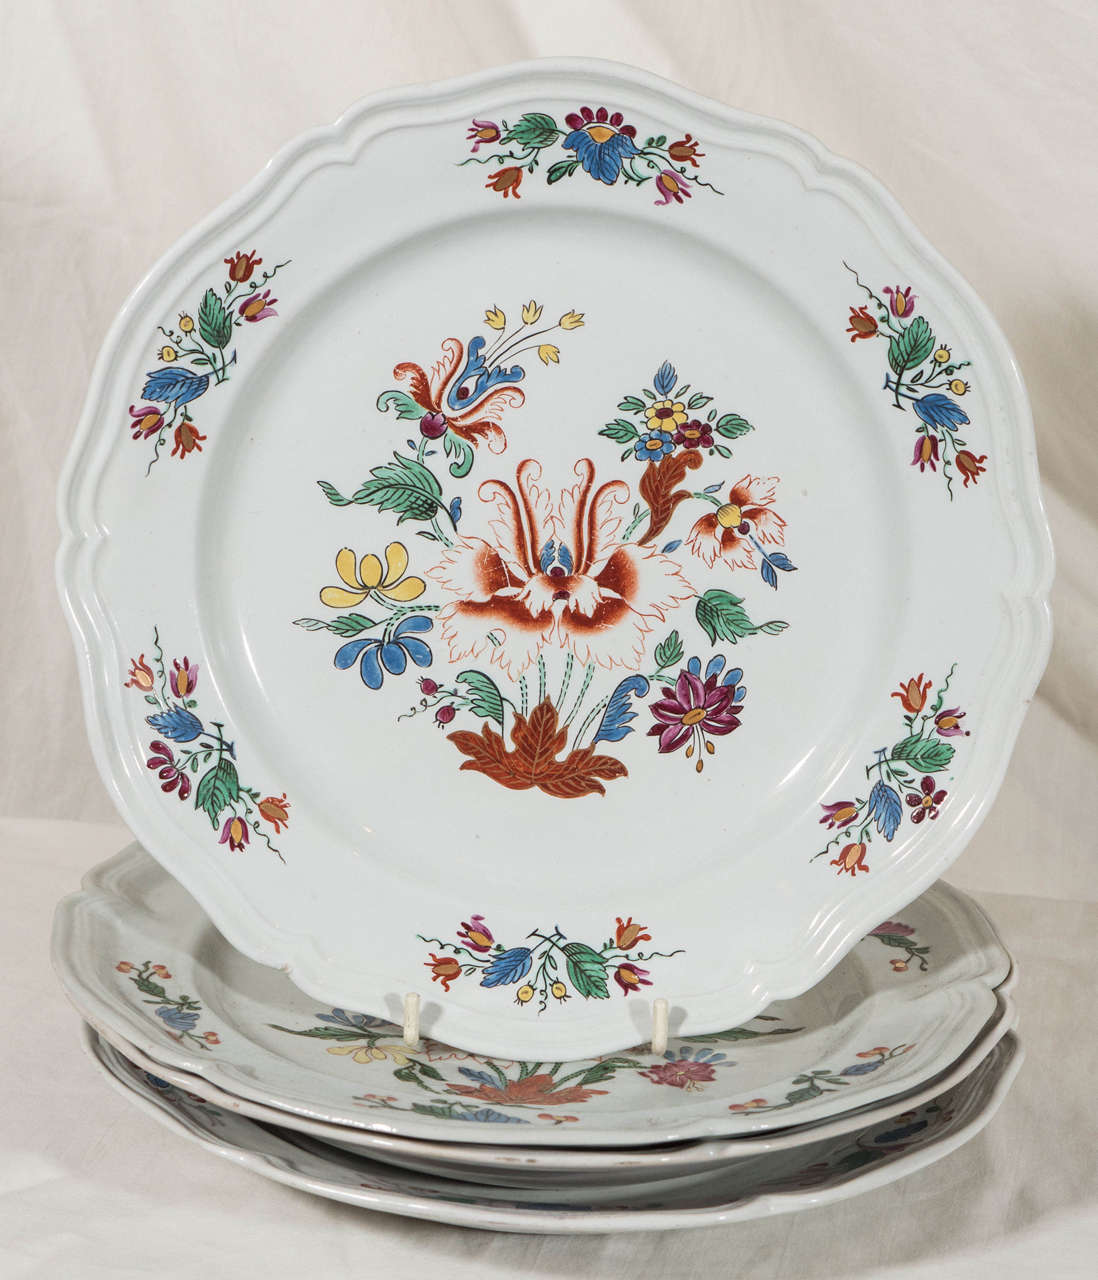 The Metropolitan Museum of Art has in their collection a pair of Doccia Ginori wine coolers in this same pattern* (see details below). This is a rare set of a dozen beautiful 18th century Italian Ginori Doccia porcelain dishes.  The dishes are true